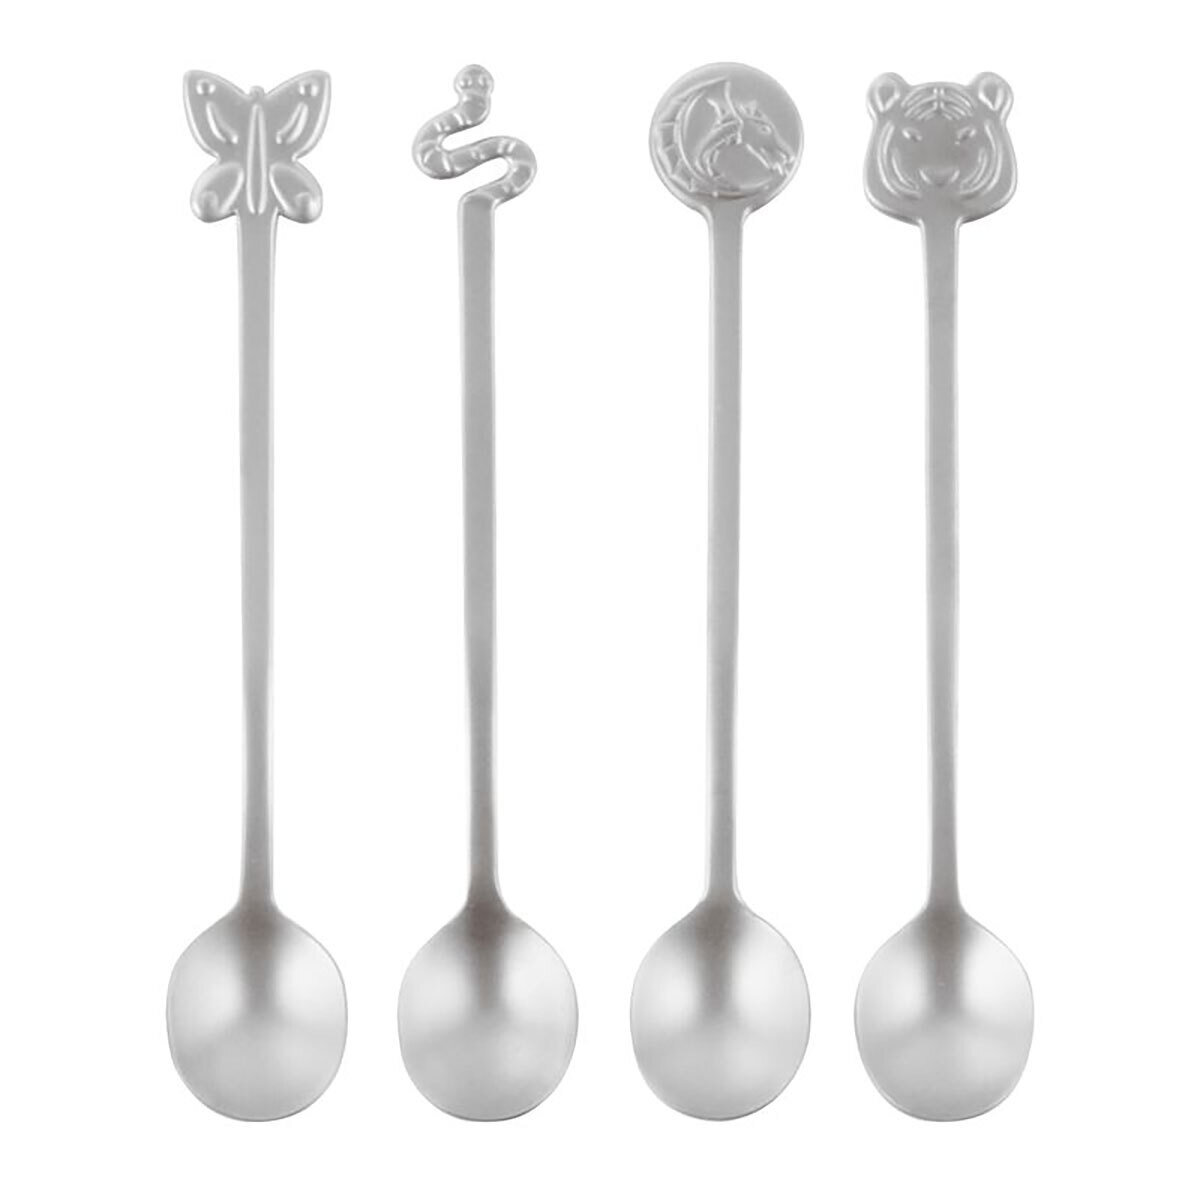 Sambonet Party Fashion Party Spoons 4 Piece Giftboxed 52649C41